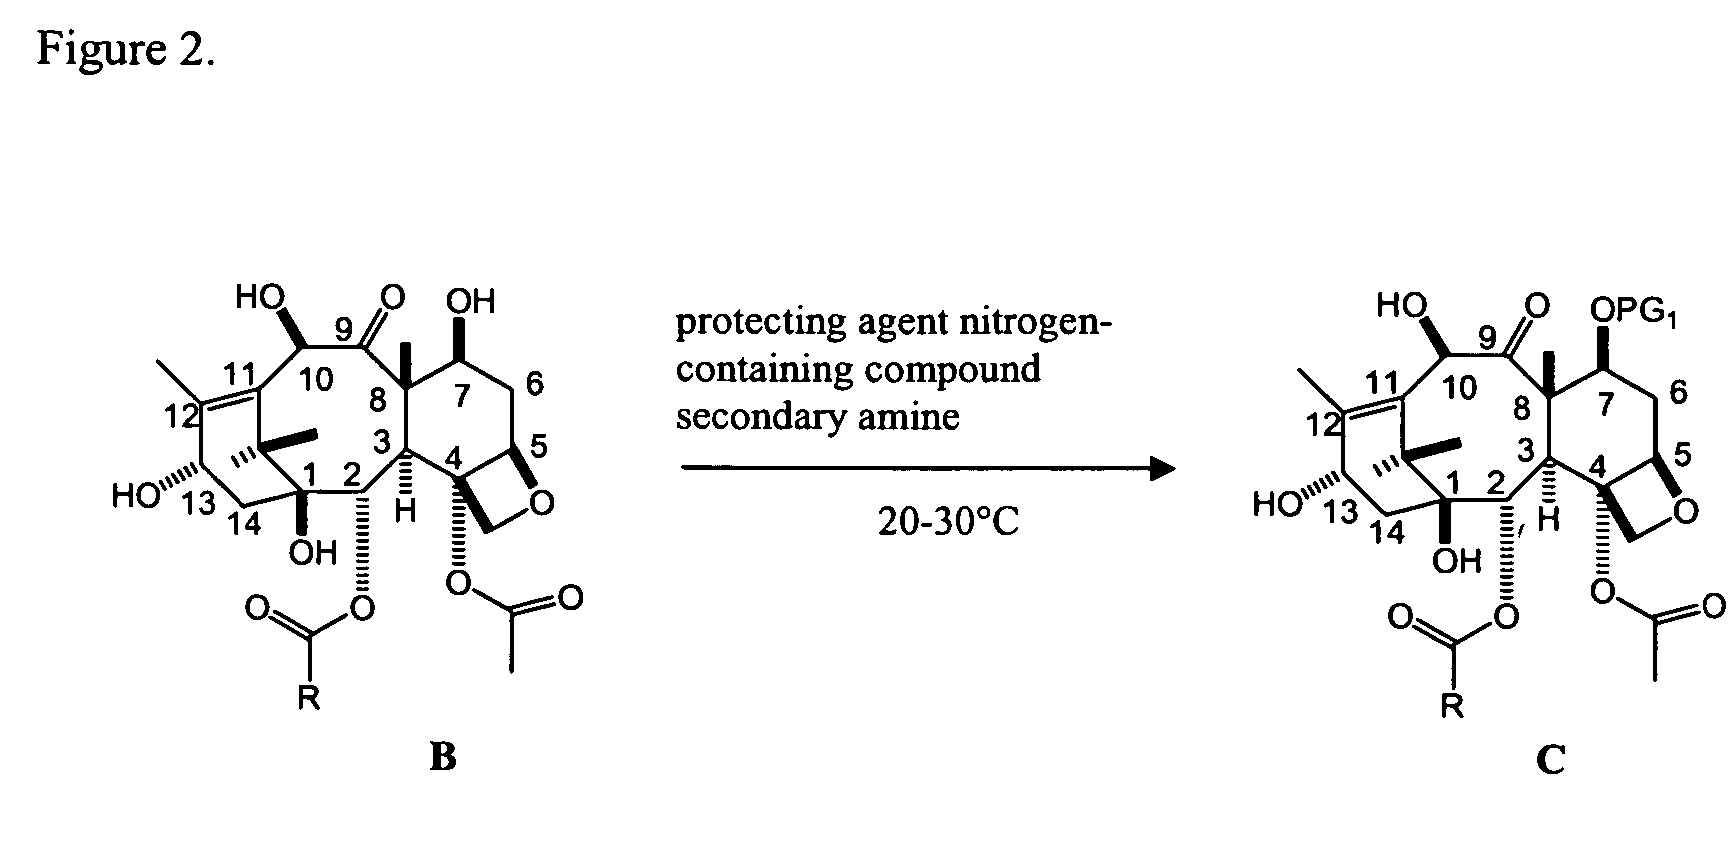 Facile method for synthesizing baccatin III compounds